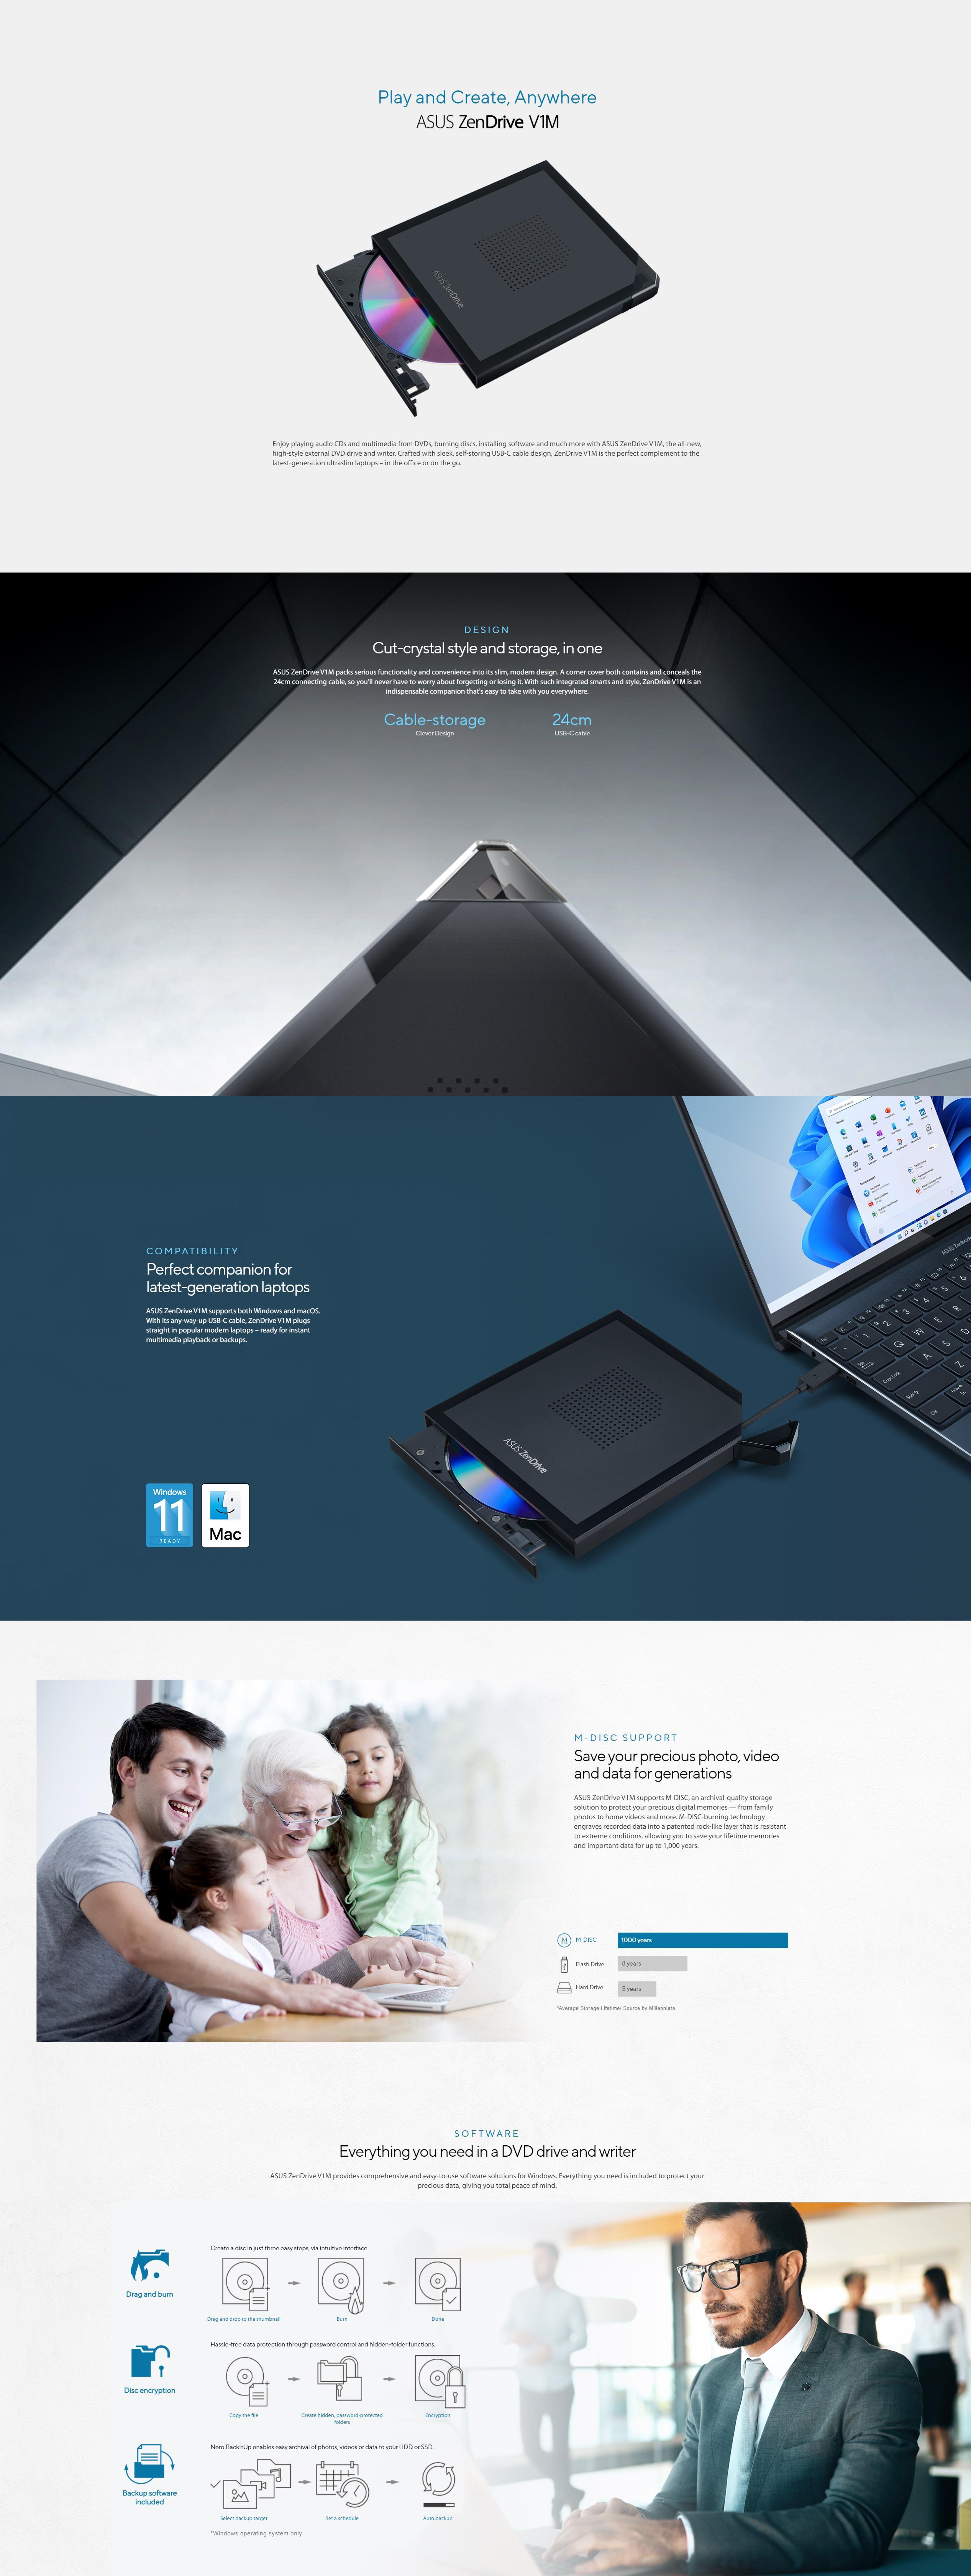 A large marketing image providing additional information about the product ASUS ZenDrive V1M External USB2.0 DVD Writer - Additional alt info not provided